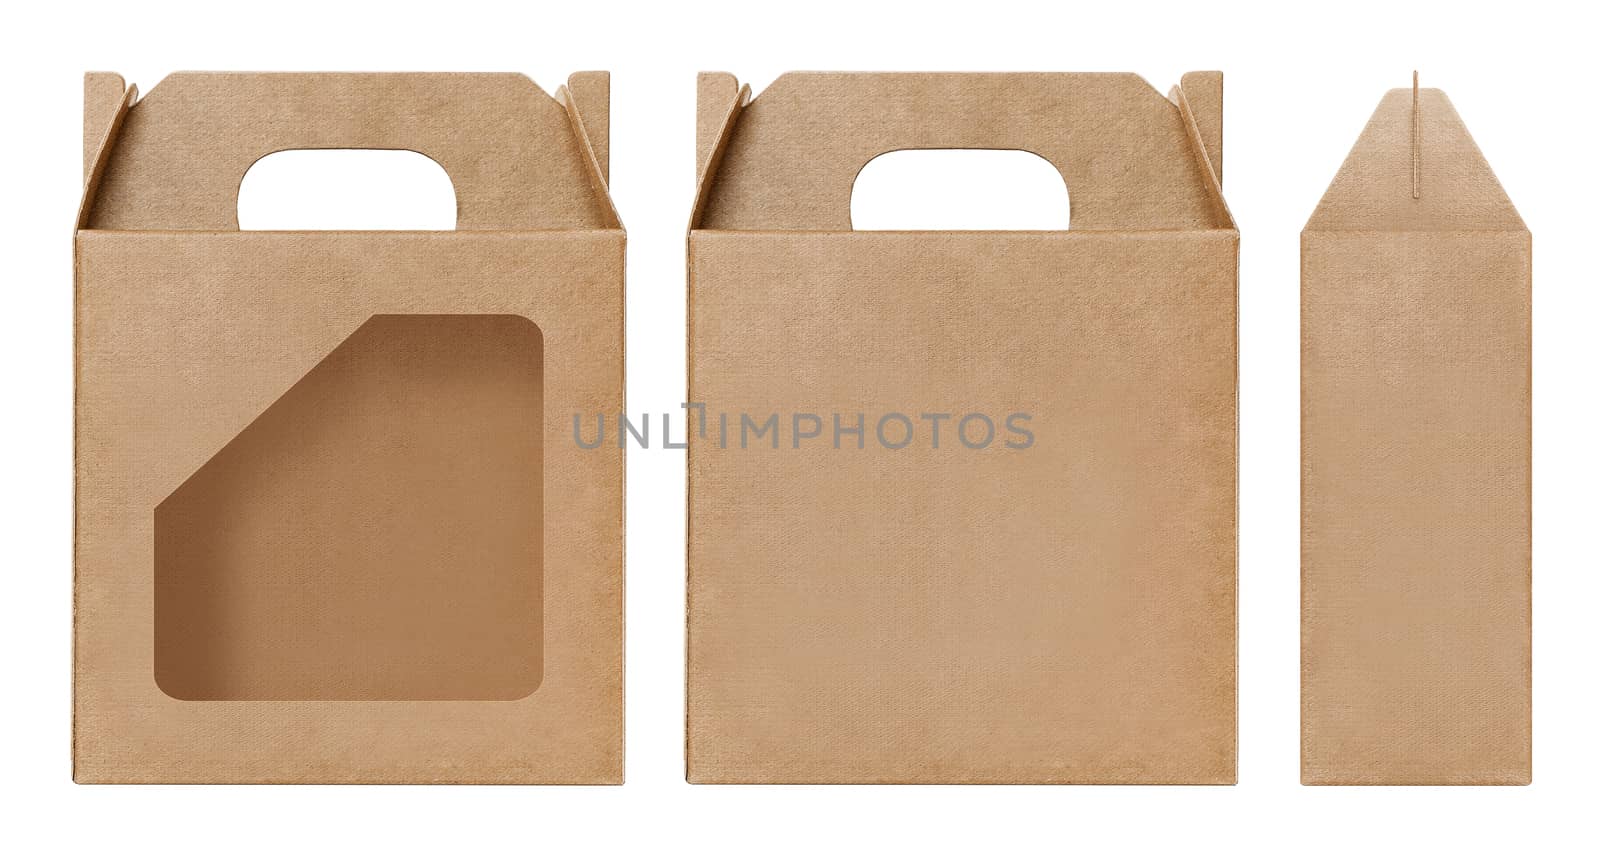 Box brown window shape cut out Packaging template, Empty kraft Box Cardboard isolated white background, Boxes Paper kraft natural material, Gift Box Brown Paper from Industrial Packaging carton by cgdeaw